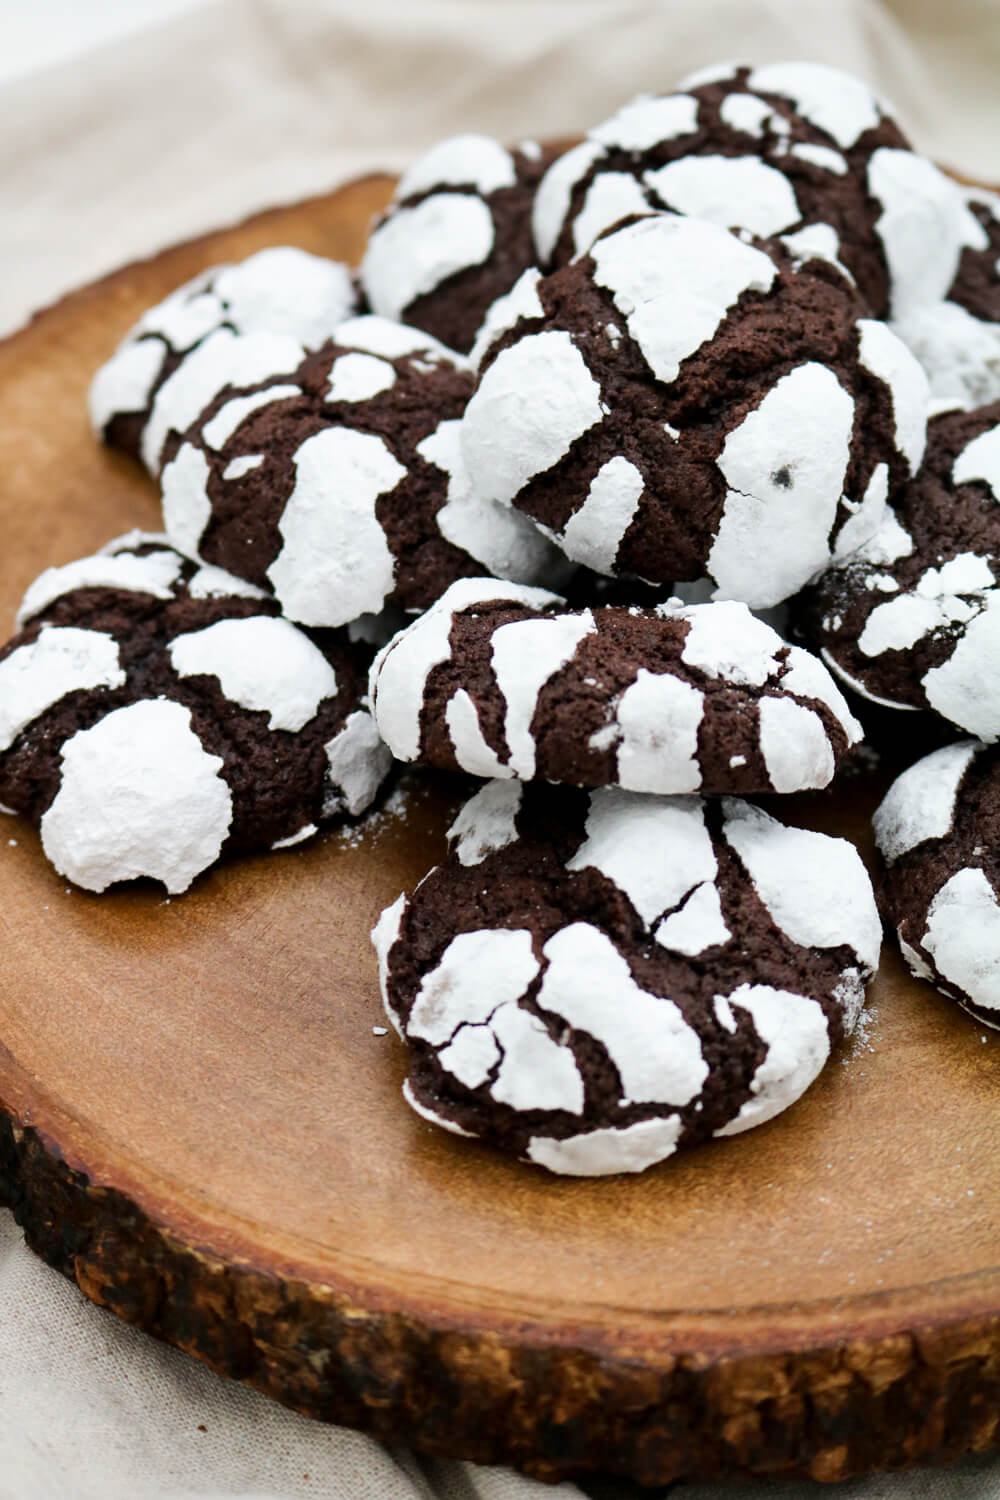 Chocolate Crinkle Cookies | Take Some Whisks